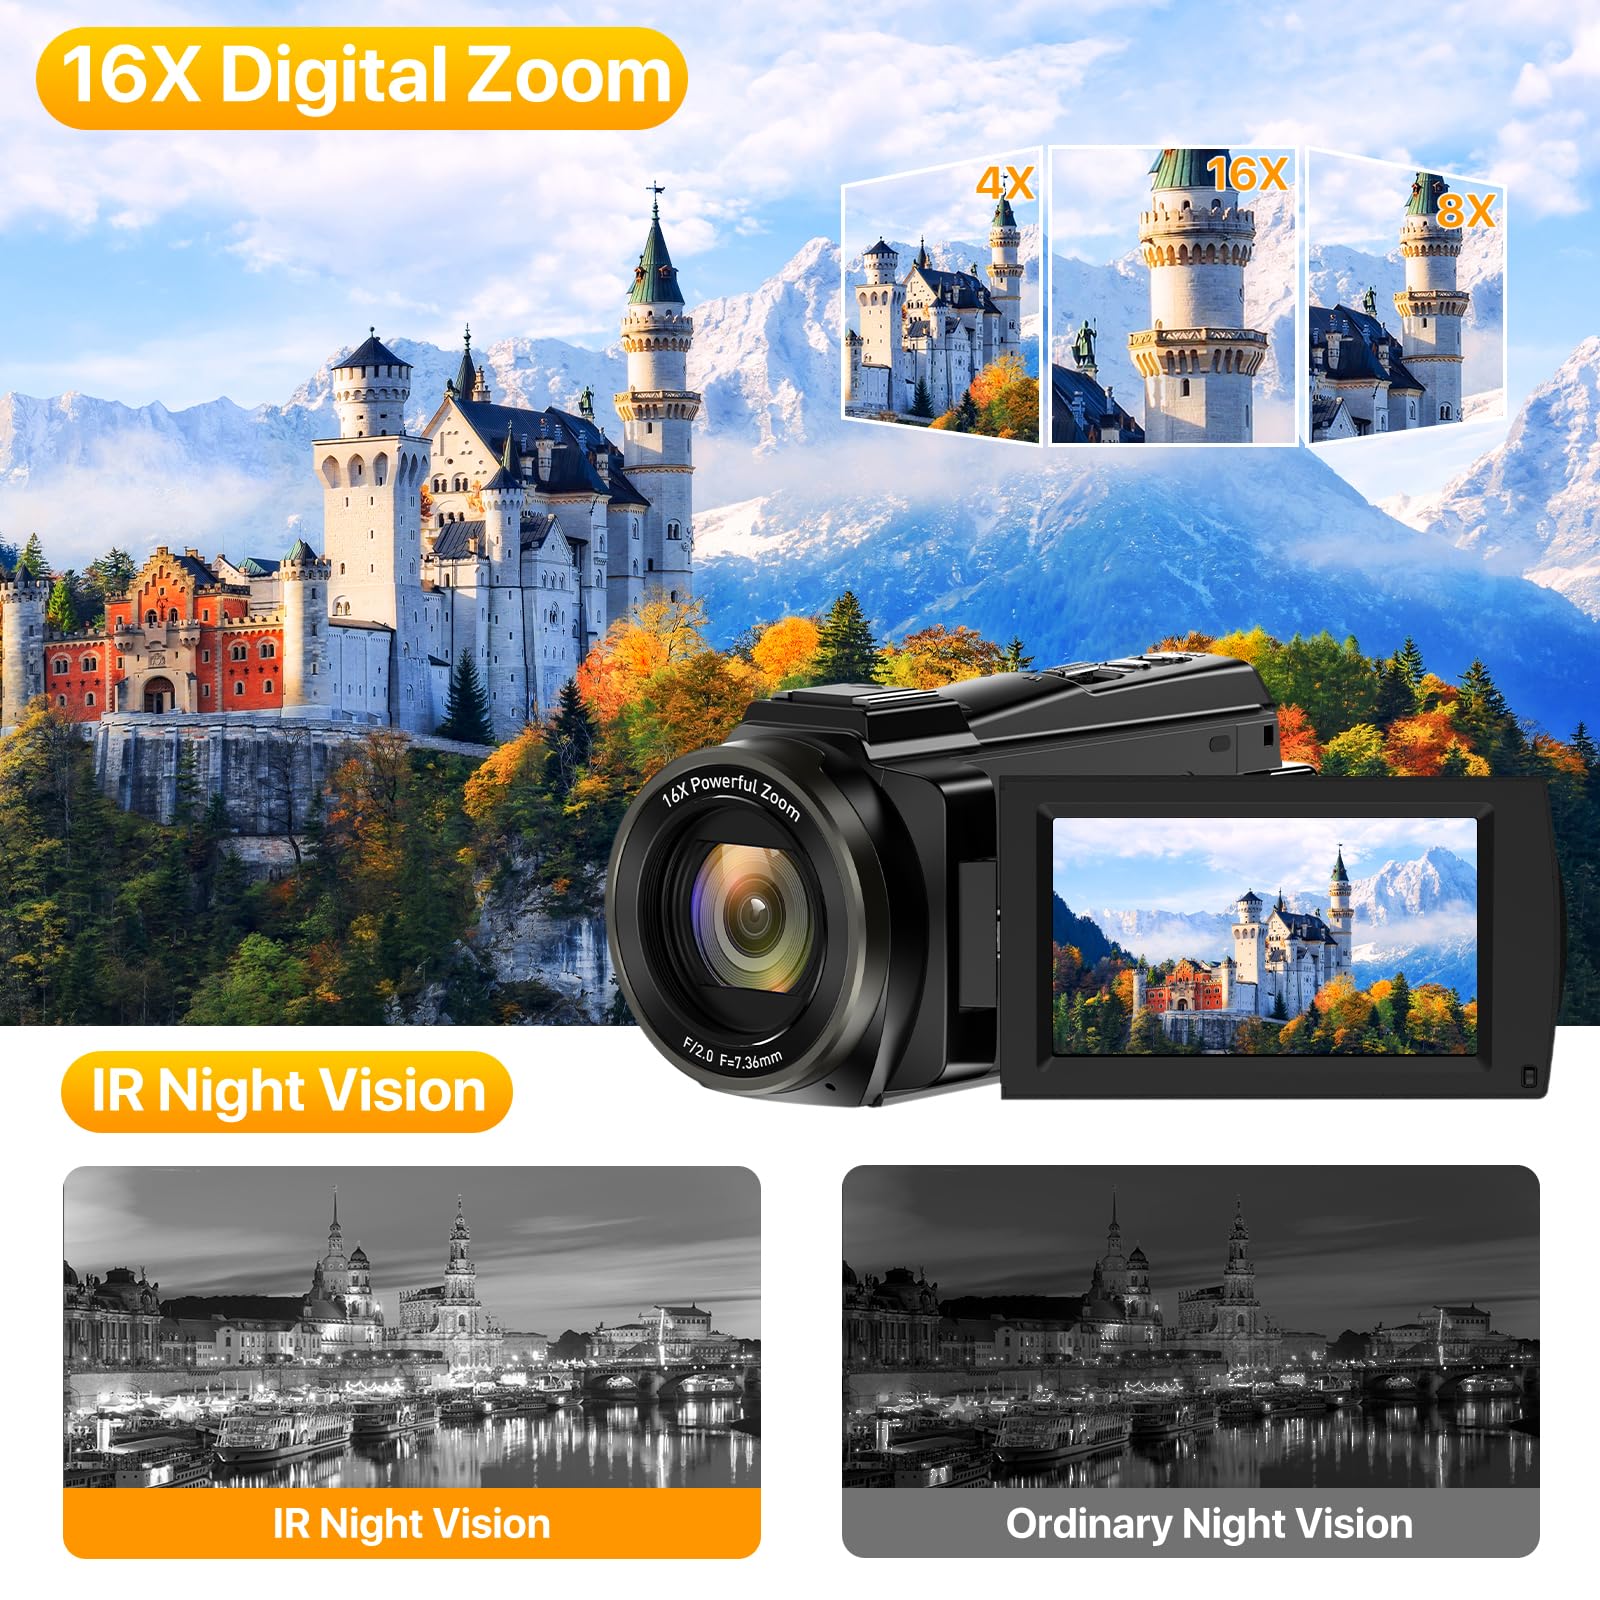 5K Video Camera Camcorder 48MP UHD WiFi IR Night Vision Vlogging Camera for YouTube 16X Digital Zoom 3” Touch Screen Camera Recorder with Microphone, Handheld Stabilizer, Lens Hood, Remote,2 Batteries